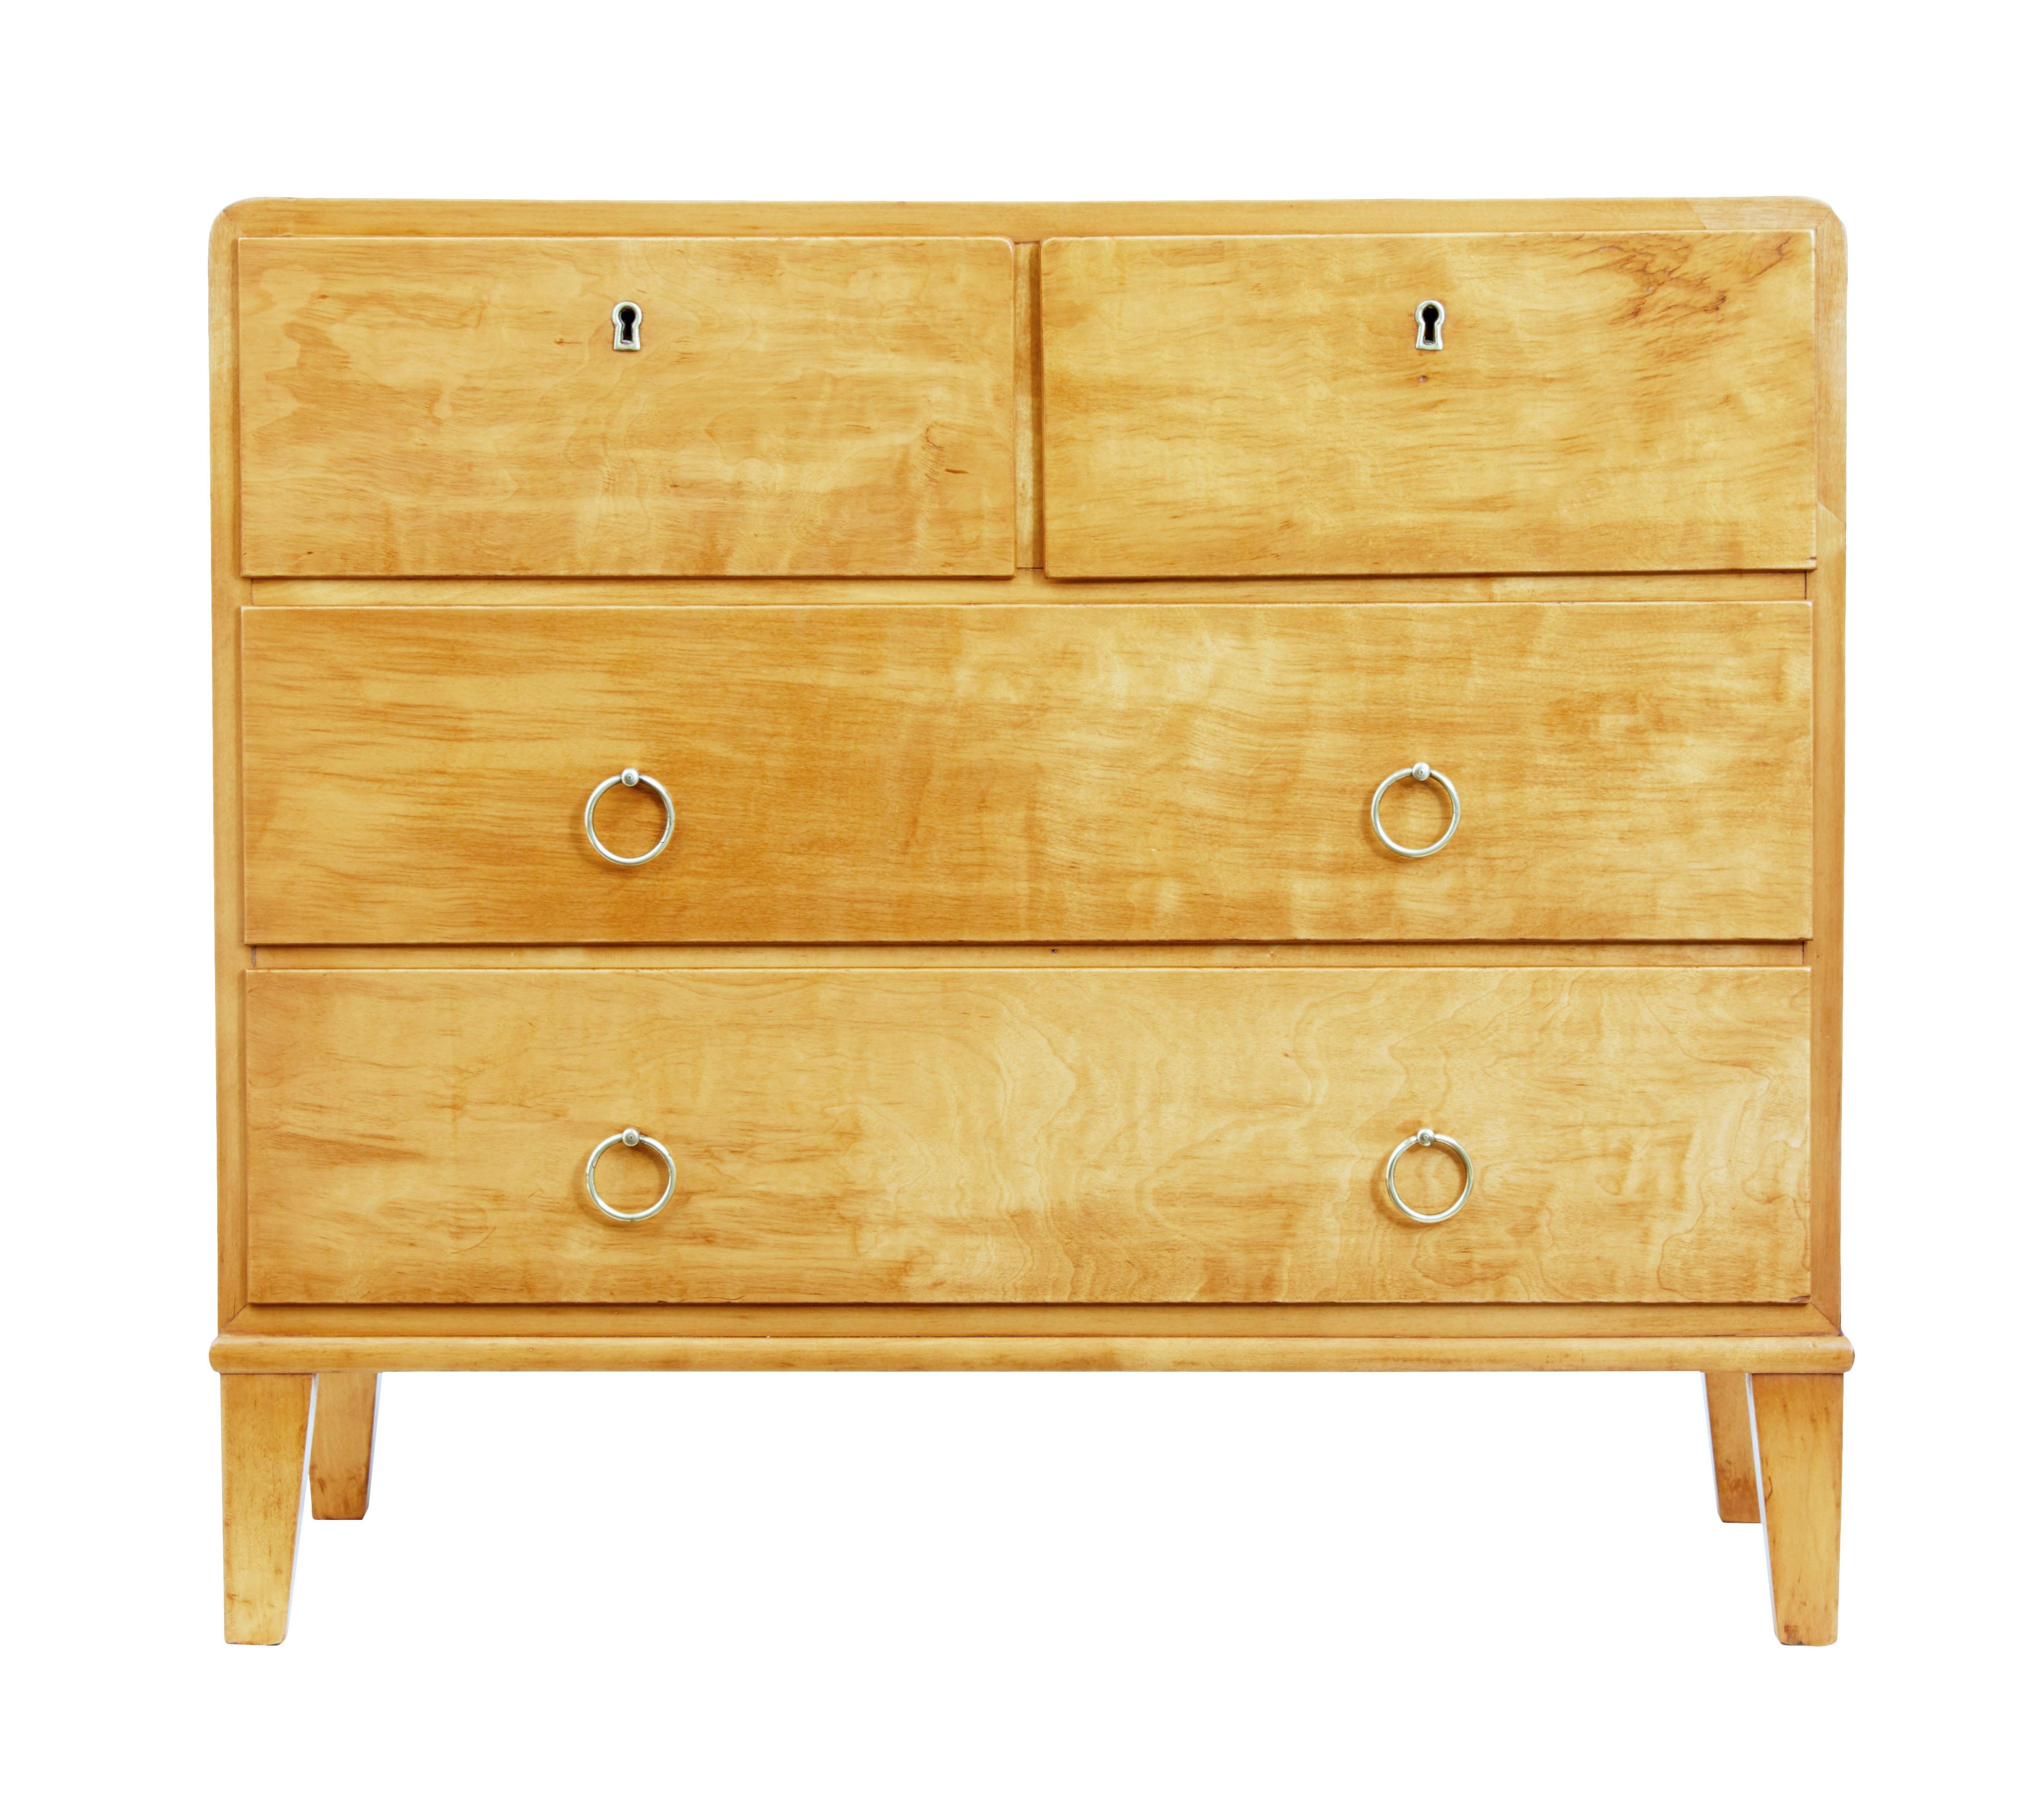 Mid-20th century Scandinavian birch chest of drawers, circa 1950.

Stylish chest of drawers of small proportions, rounded top edges in the Art Deco taste, 2 short drawers over 2 long. Top 2 drawers open on the key, bottom drawers with brass ring